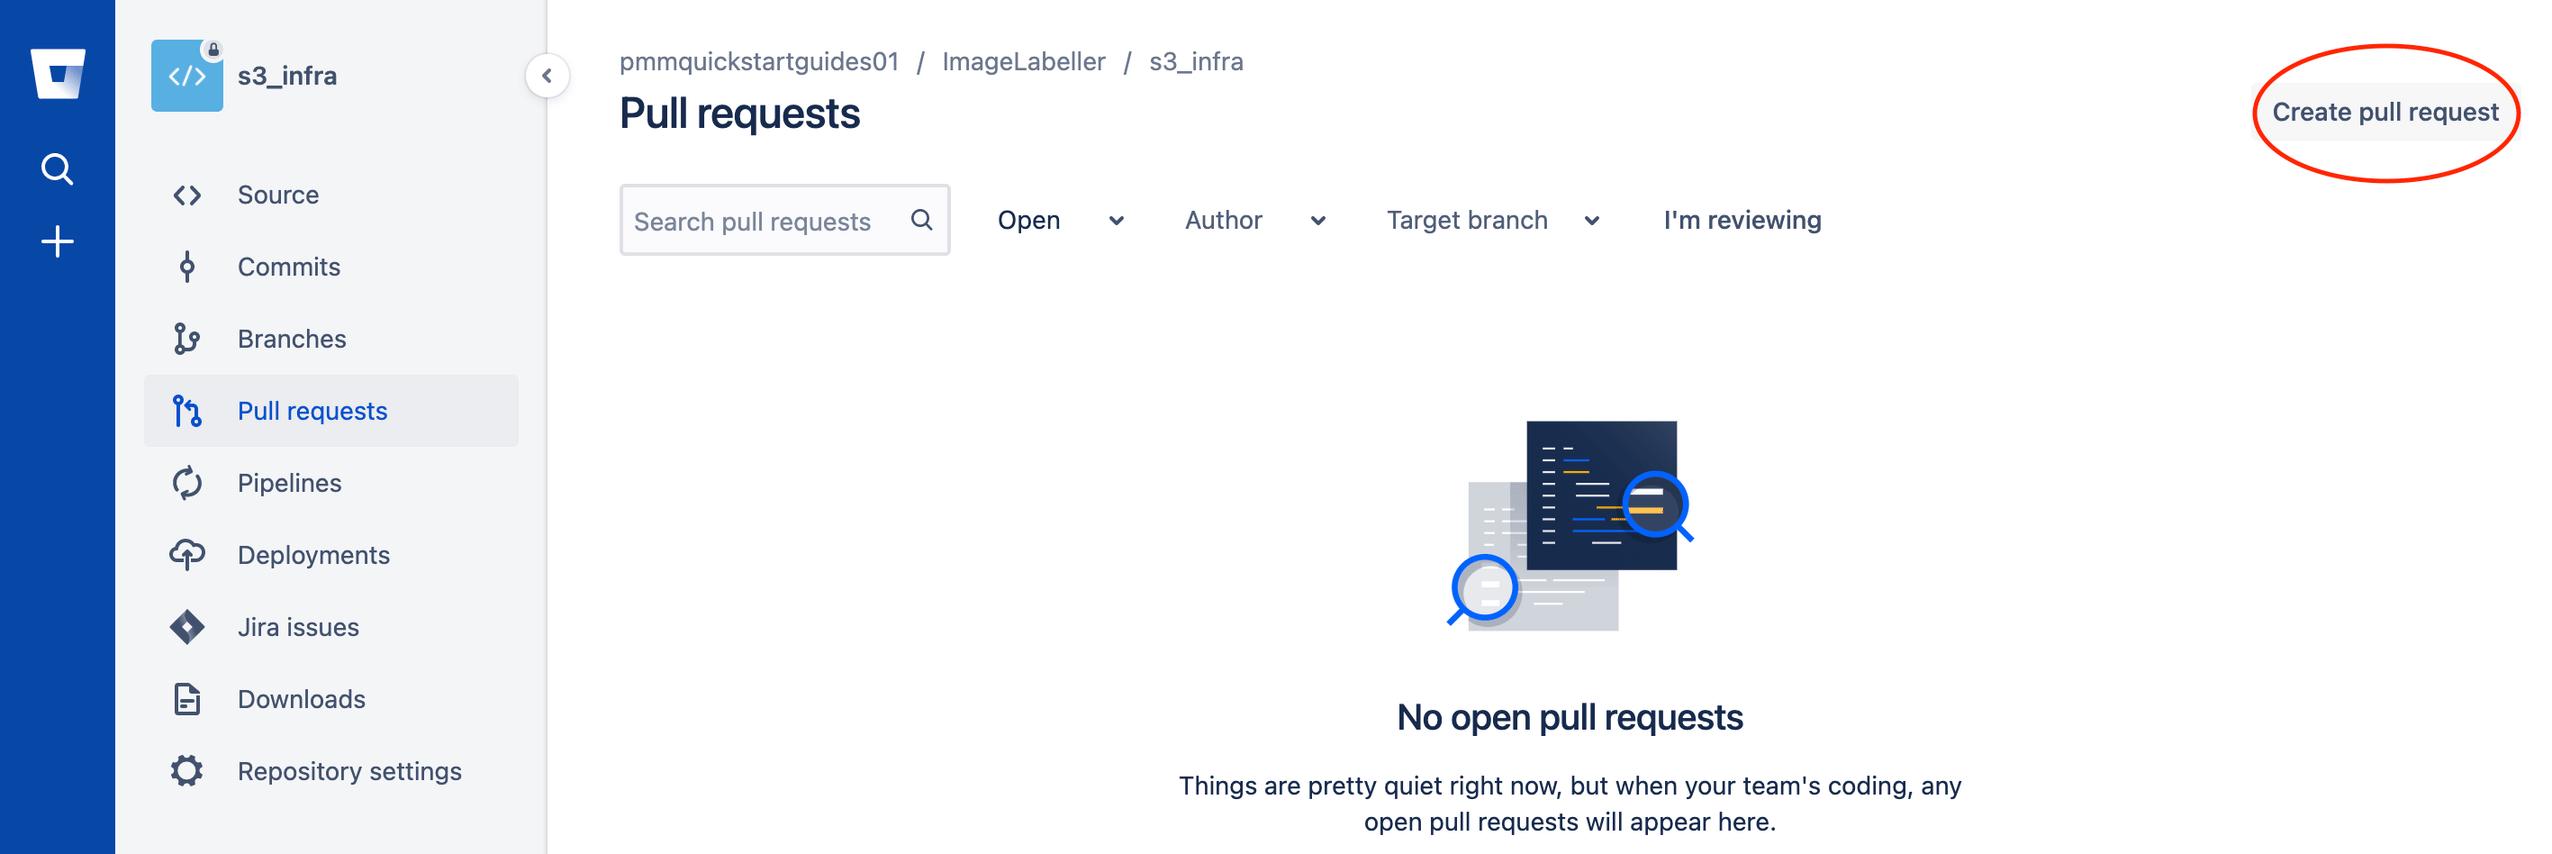 Creating a pull request in Bitbucket